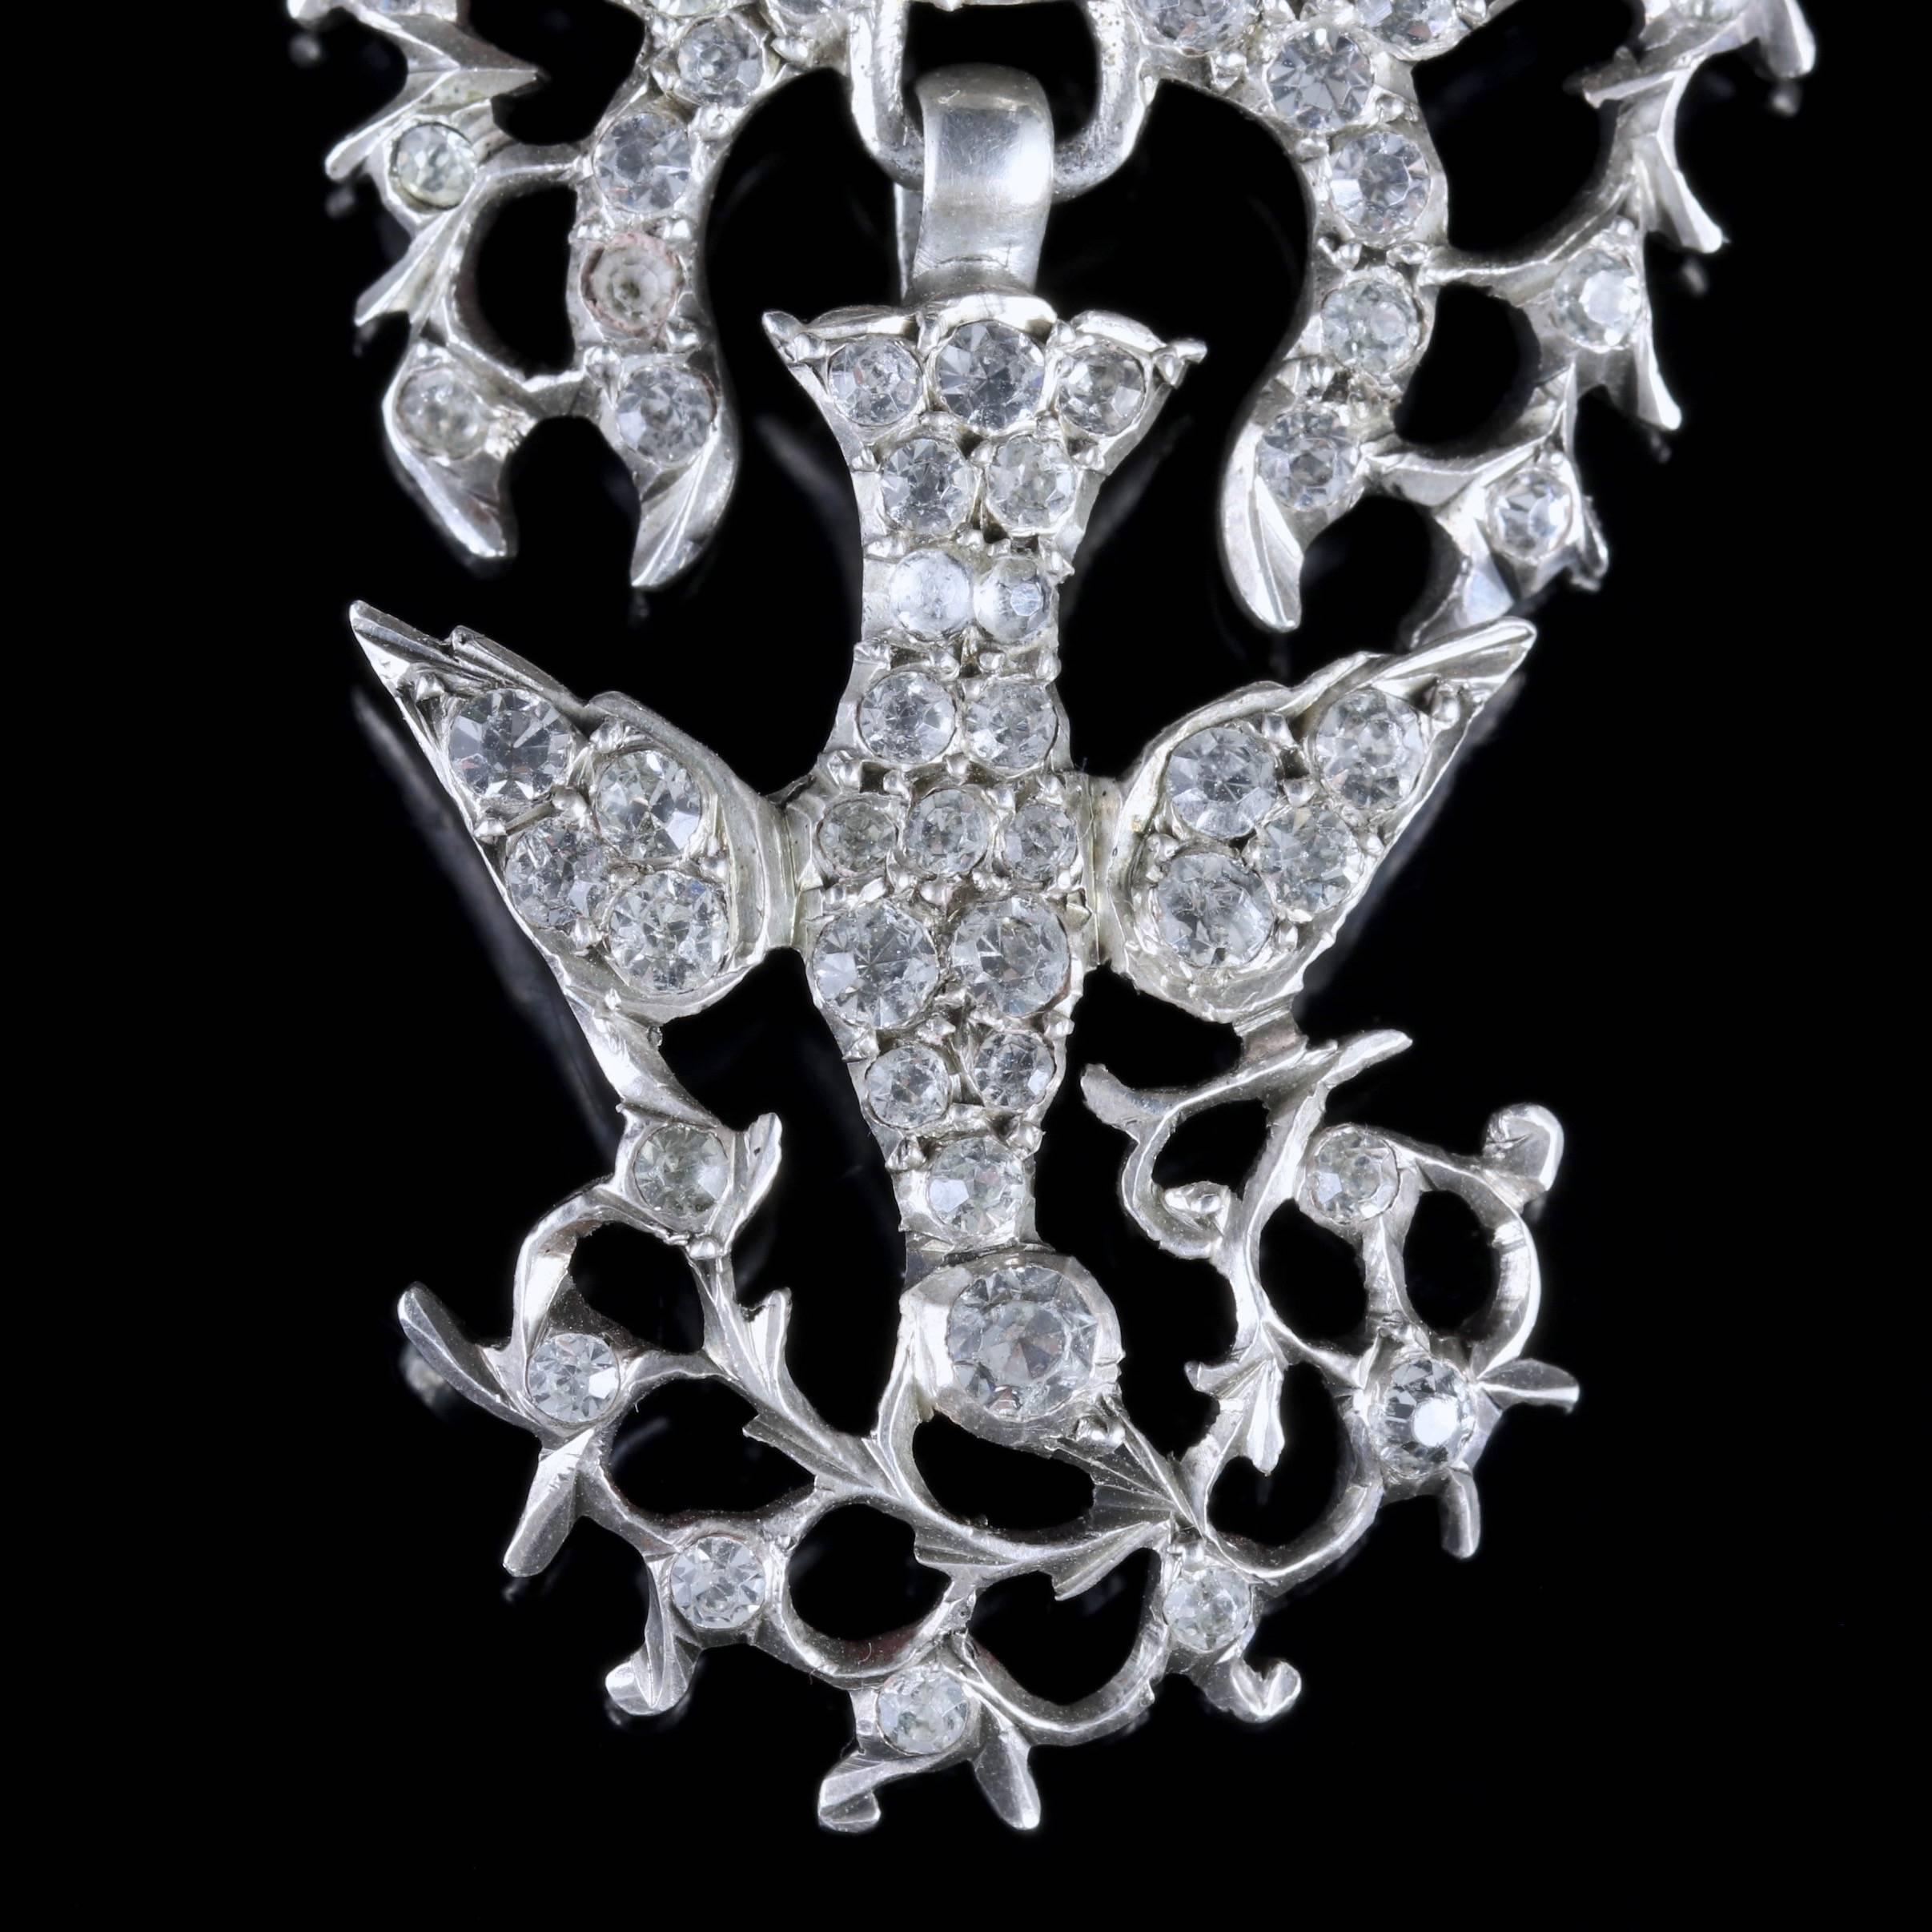 To read more please click continue reading below-

This beautiful antique Silver Paste Dove pendant is Victorian Circa 1860. 

The wonderful pendant is decorated in sparkling white Paste Stones and features a fancy bow with a hanging Dove carrying